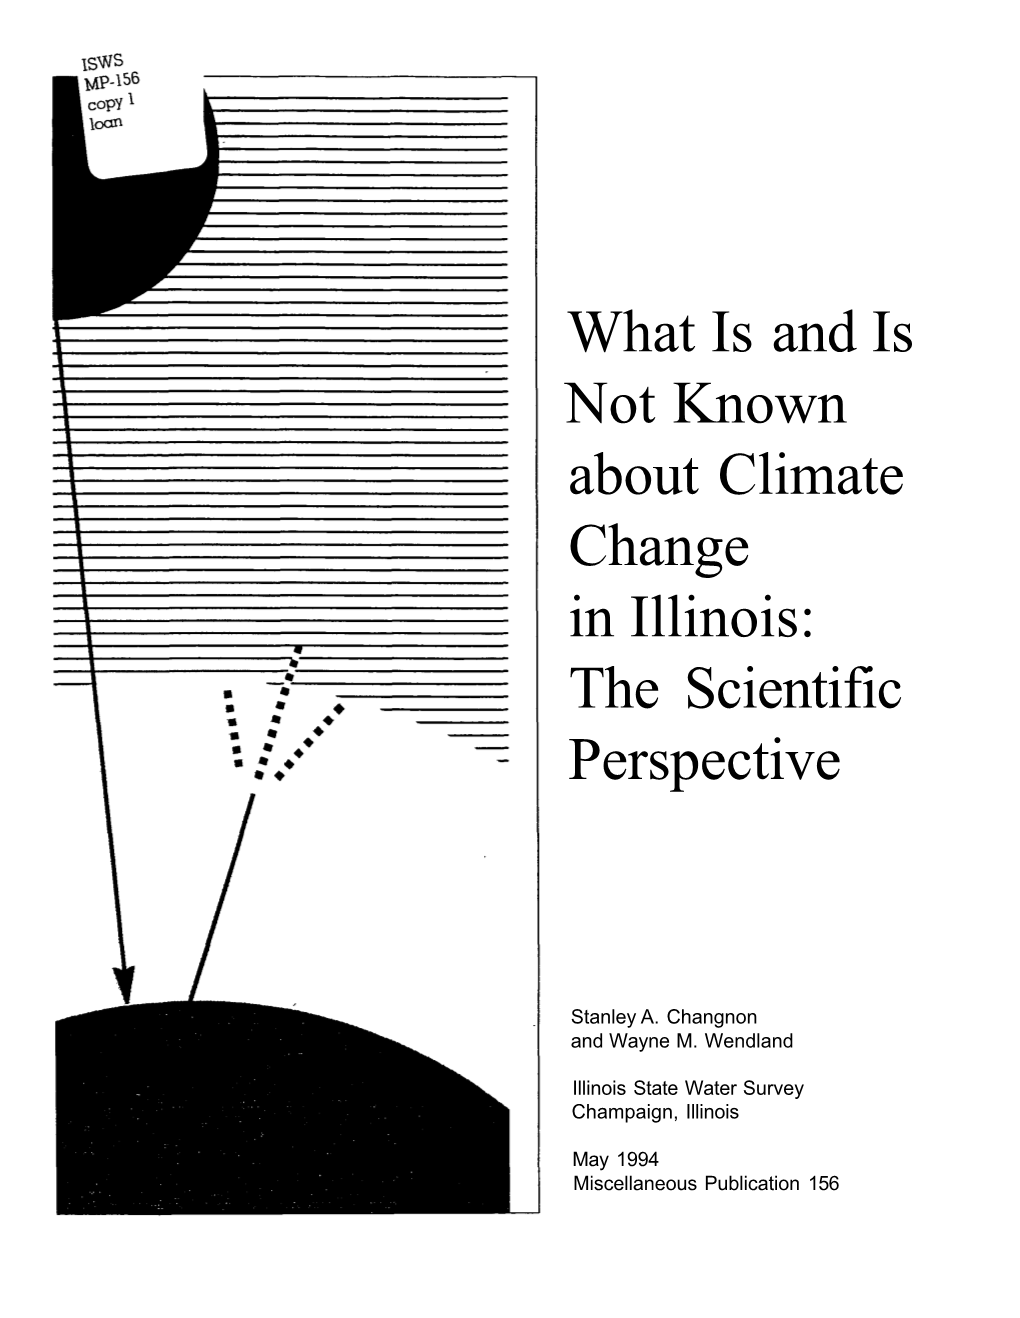 What Is and Is Not Known About Climate Change in Illinois: the Scientific Perspective